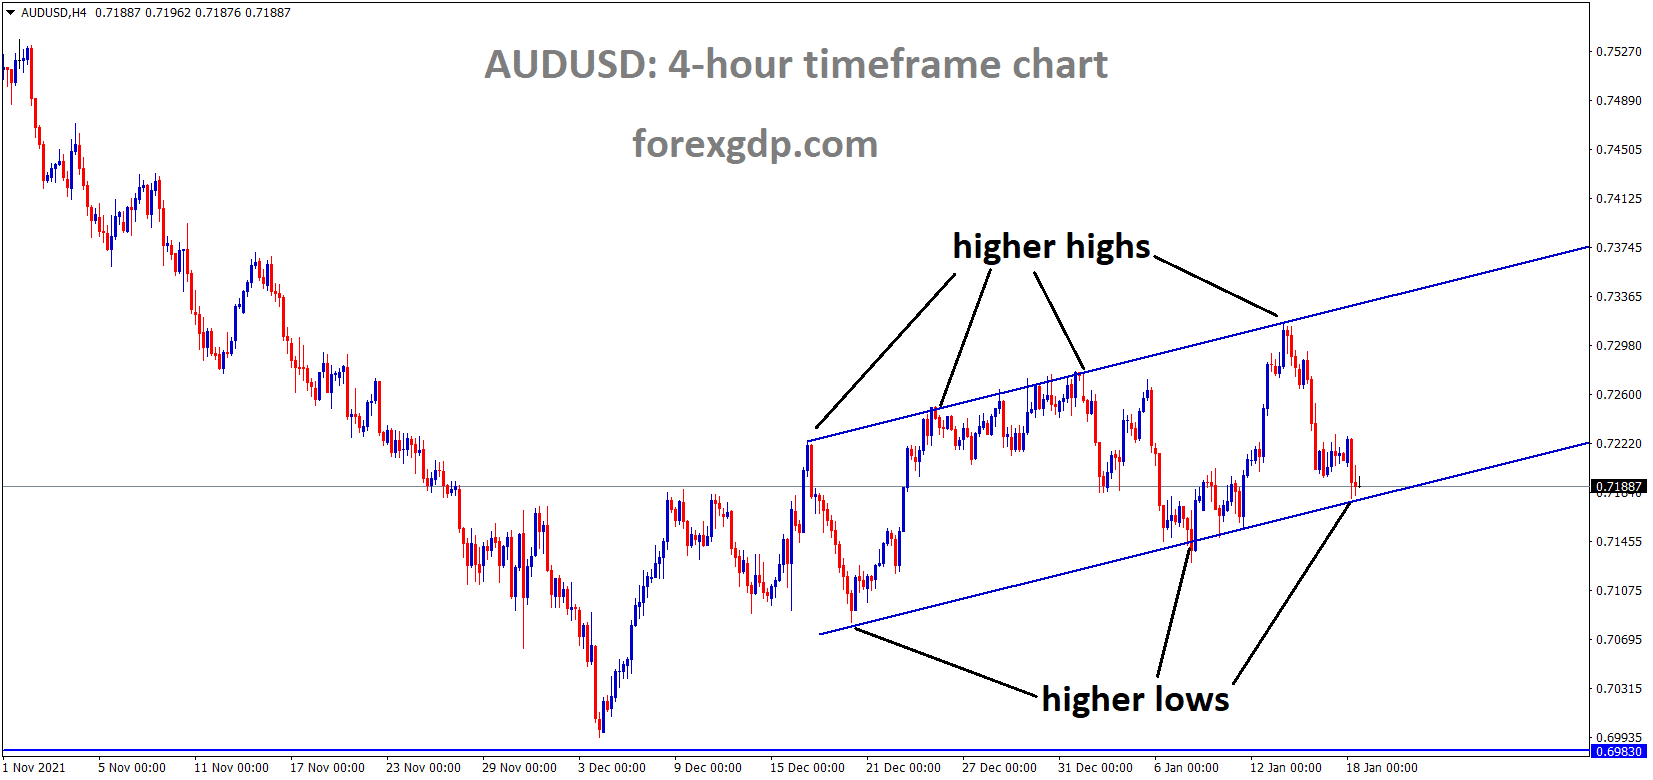 AUDUSD is moving in an Ascending channel and the market has reached the higher low area of the Ascending channel